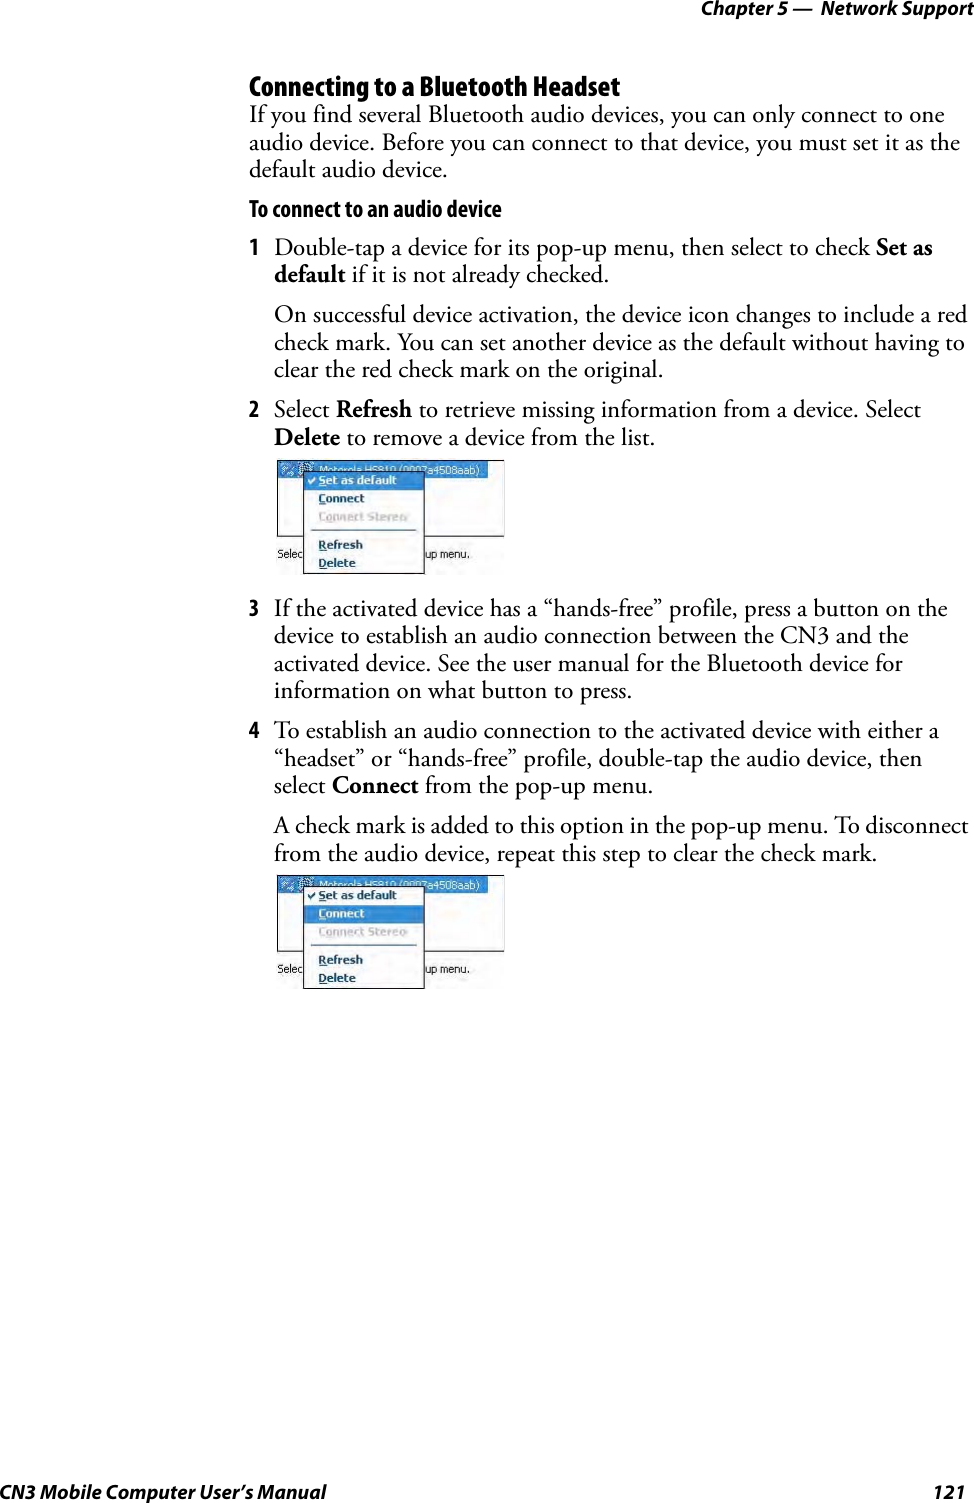 Chapter 5 —  Network SupportCN3 Mobile Computer User’s Manual 121Connecting to a Bluetooth HeadsetIf you find several Bluetooth audio devices, you can only connect to one audio device. Before you can connect to that device, you must set it as the default audio device.To connect to an audio device1Double-tap a device for its pop-up menu, then select to check Set as default if it is not already checked.On successful device activation, the device icon changes to include a red check mark. You can set another device as the default without having to clear the red check mark on the original.2Select Refresh to retrieve missing information from a device. Select Delete to remove a device from the list.3If the activated device has a “hands-free” profile, press a button on the device to establish an audio connection between the CN3 and the activated device. See the user manual for the Bluetooth device for information on what button to press.4To establish an audio connection to the activated device with either a “headset” or “hands-free” profile, double-tap the audio device, then select Connect from the pop-up menu.A check mark is added to this option in the pop-up menu. To disconnect from the audio device, repeat this step to clear the check mark.